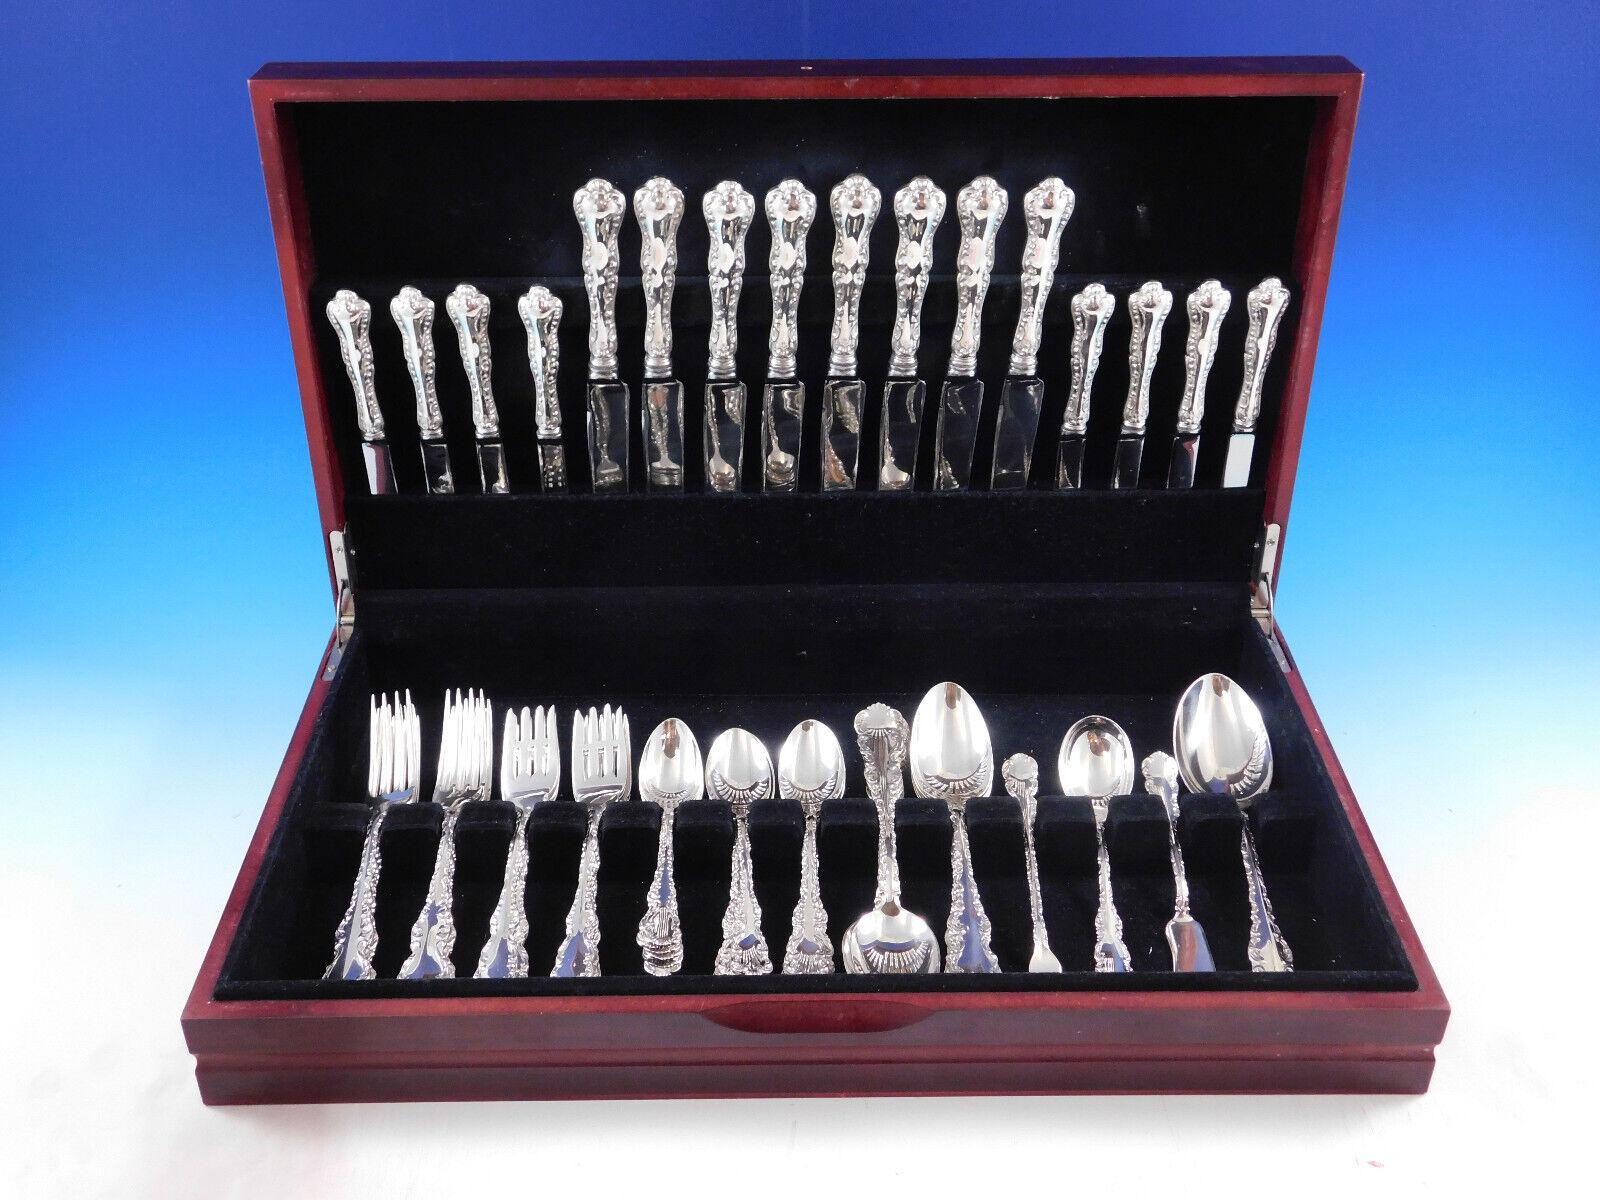 Scarce Louis XV by Birks (Canada) sterling silver Flatware set, 60 pieces. This set includes:

8 Knives, 8 5/8